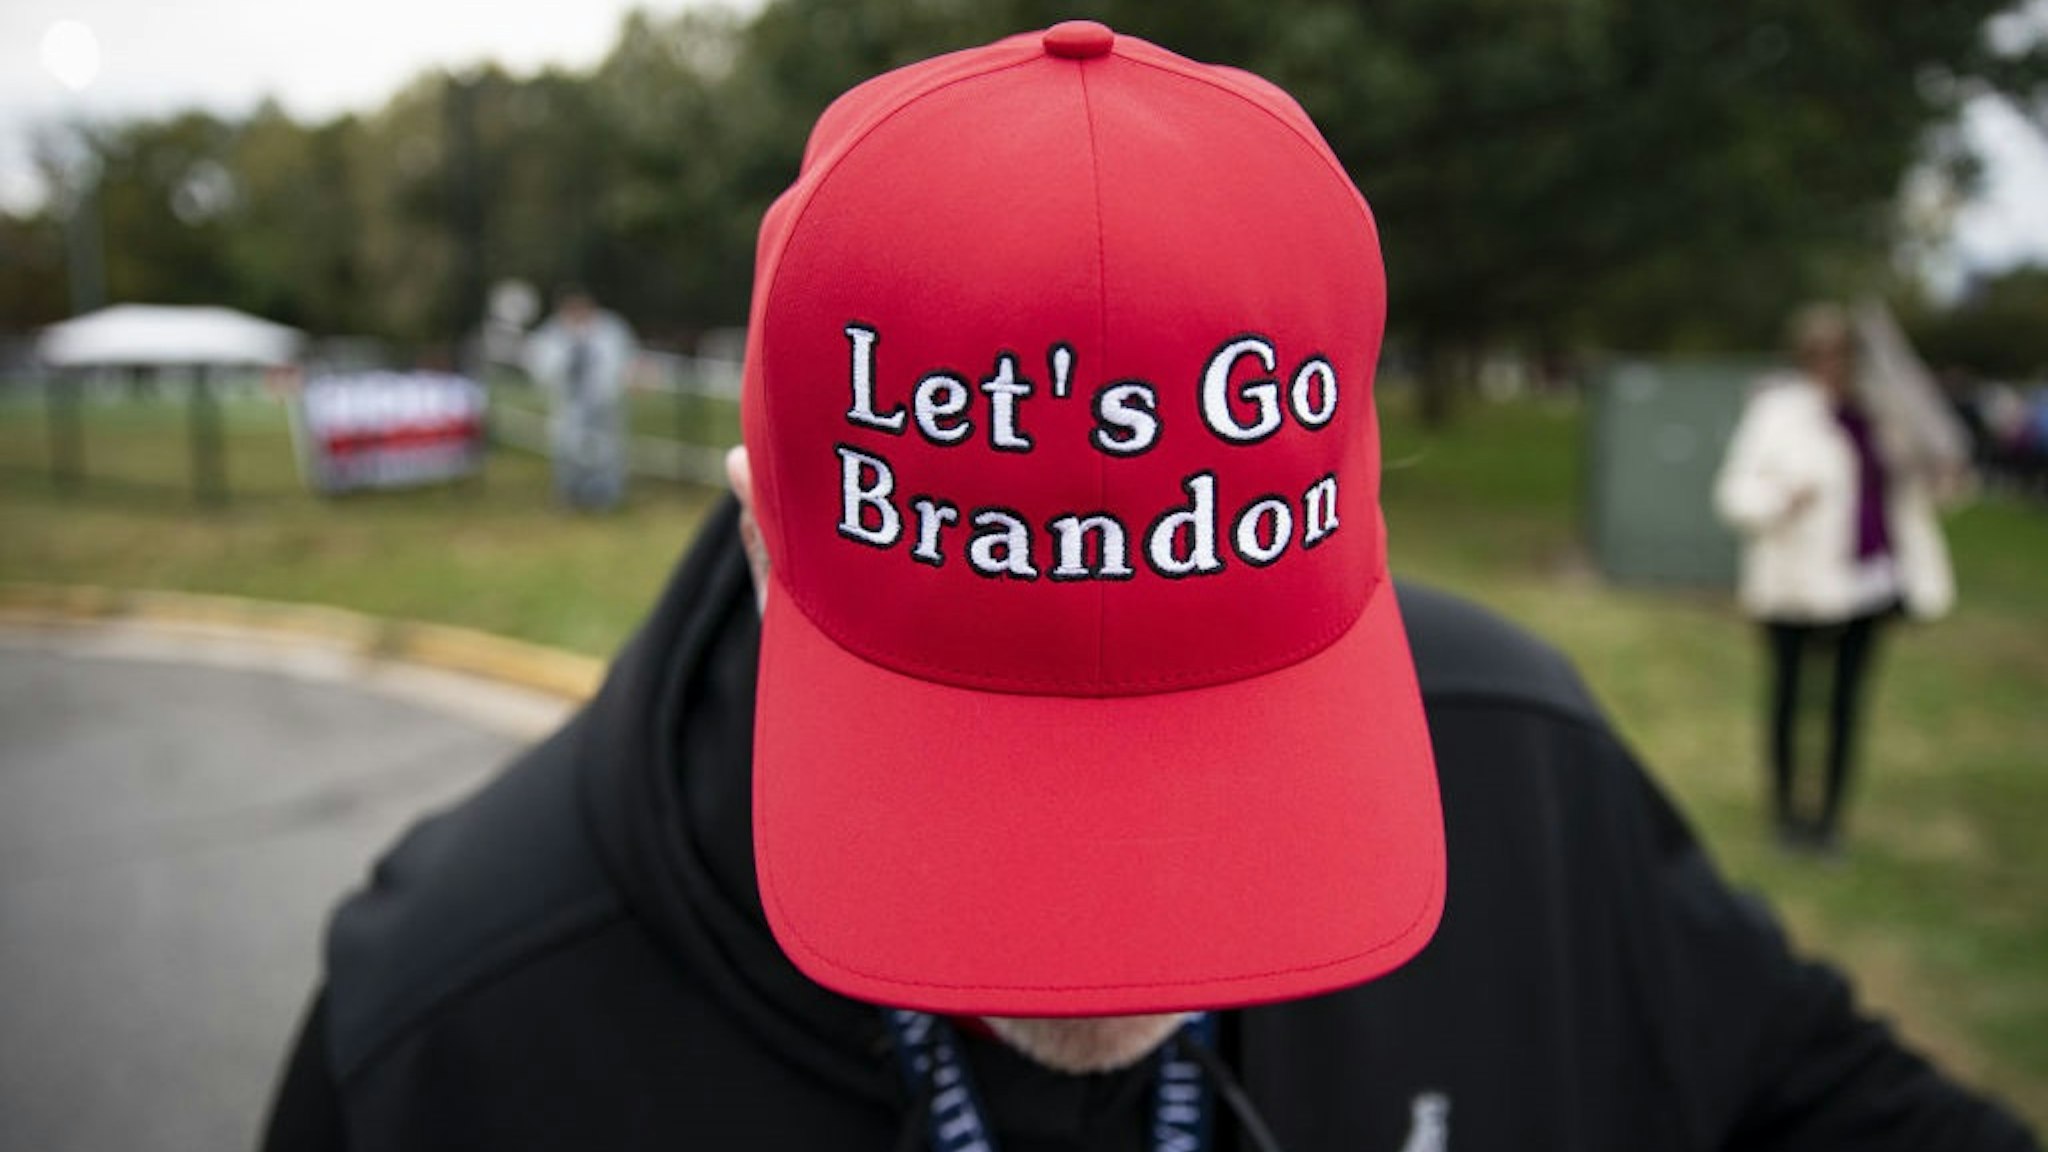 A supporter of former U.S. President Donald Trump displays a "Let's Go Brandon" hat before a campaign event for Terry McAuliffe, Democratic gubernatorial candidate for Virginia, in Arlington, Virginia,